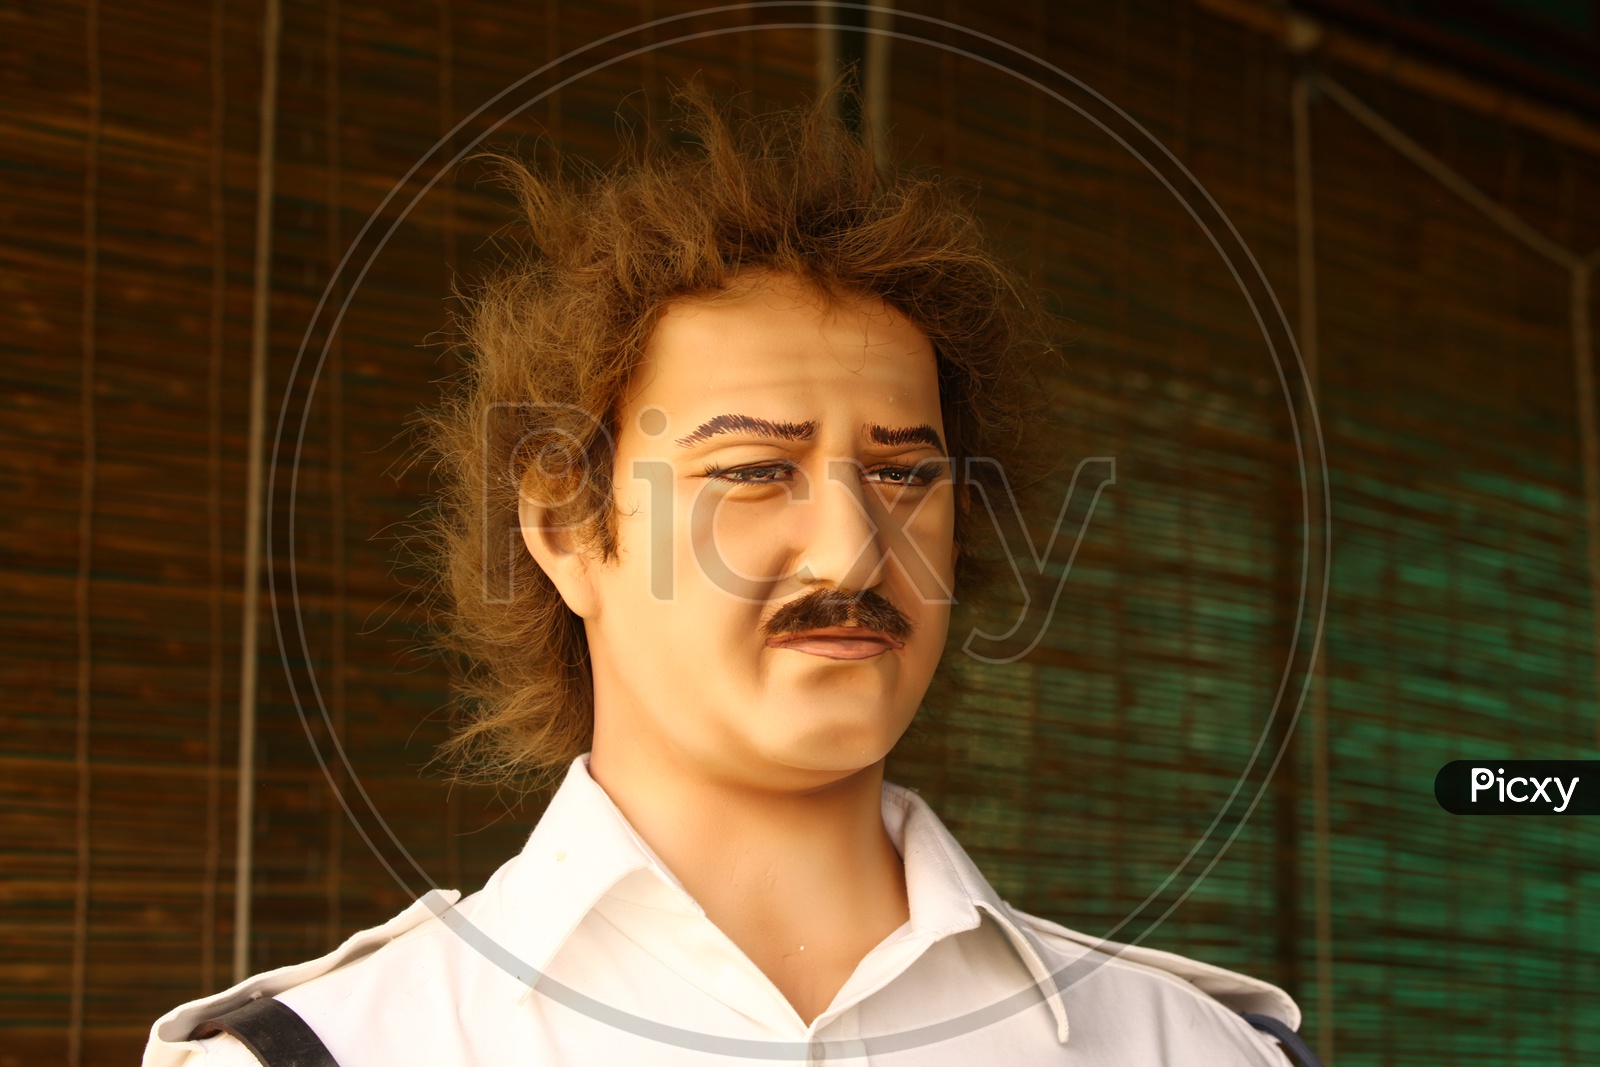 A Male Mannequin with frizzy hair